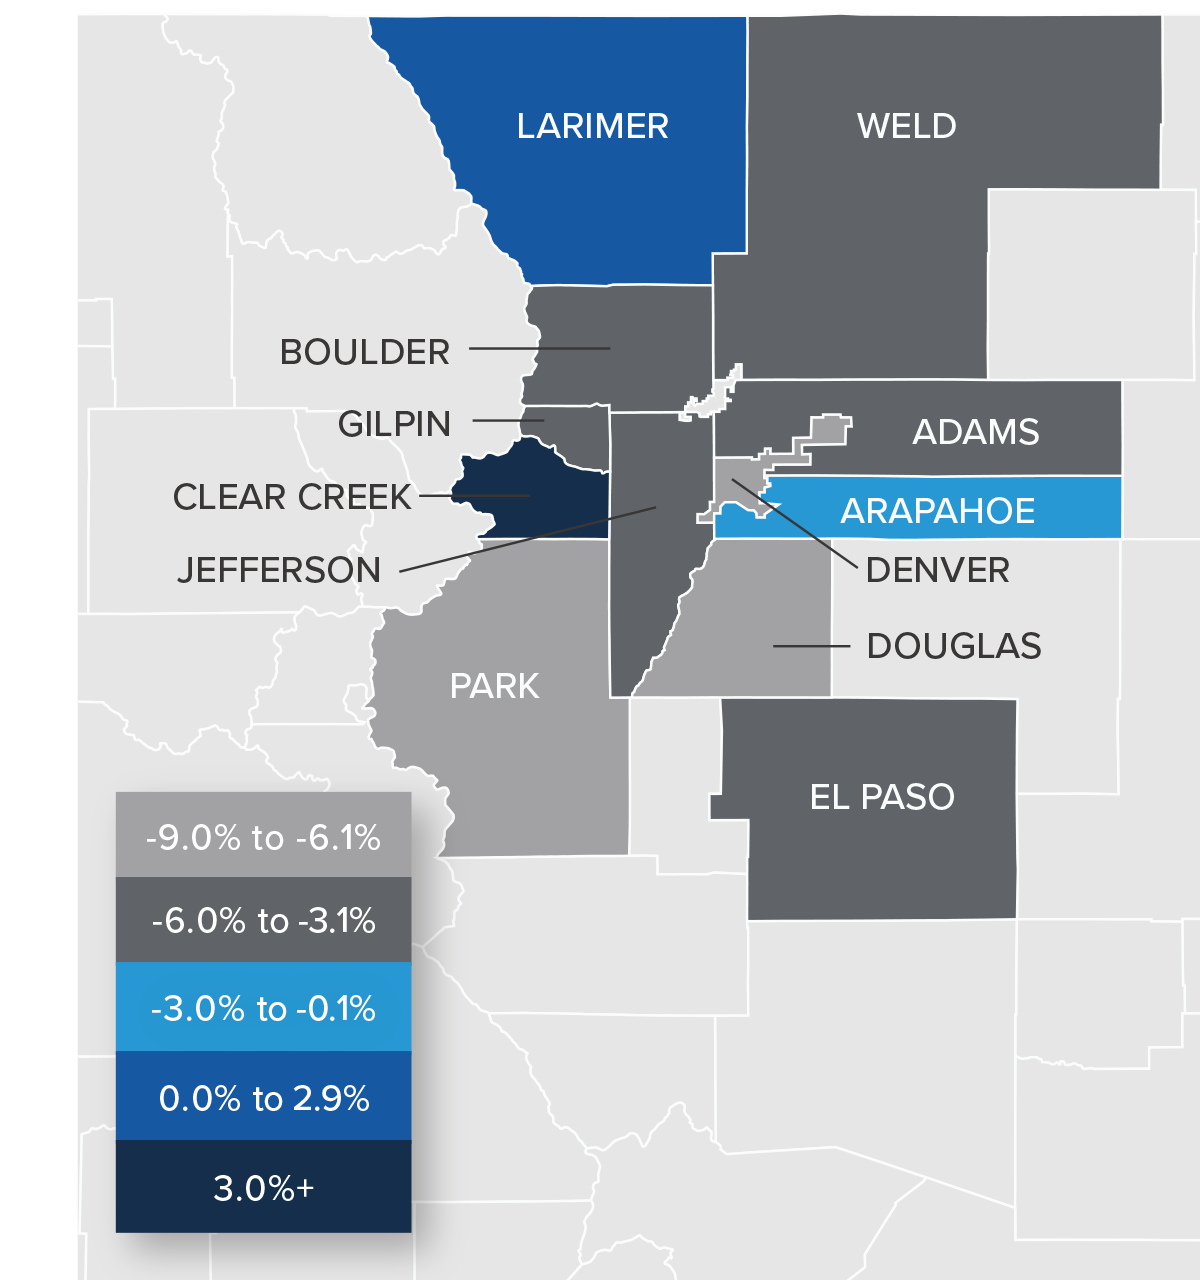 A map showing the real estate home prices percentage changes for various counties in Colorado. Different colors correspond to different tiers of percentage change. Park, Denver and Douglas Counties had a percentage change in the -9% to -6.1% range. El Paso, Weld, Boulder, Gilpin, Jefferson, and Adams Counties are in the -6% to -3.1% change range. Arapahoe County is in the -3% to -0.1% change range. Larimer is in the 0% to 2.9% change range and Clear Creek is in the 3%+ change range.